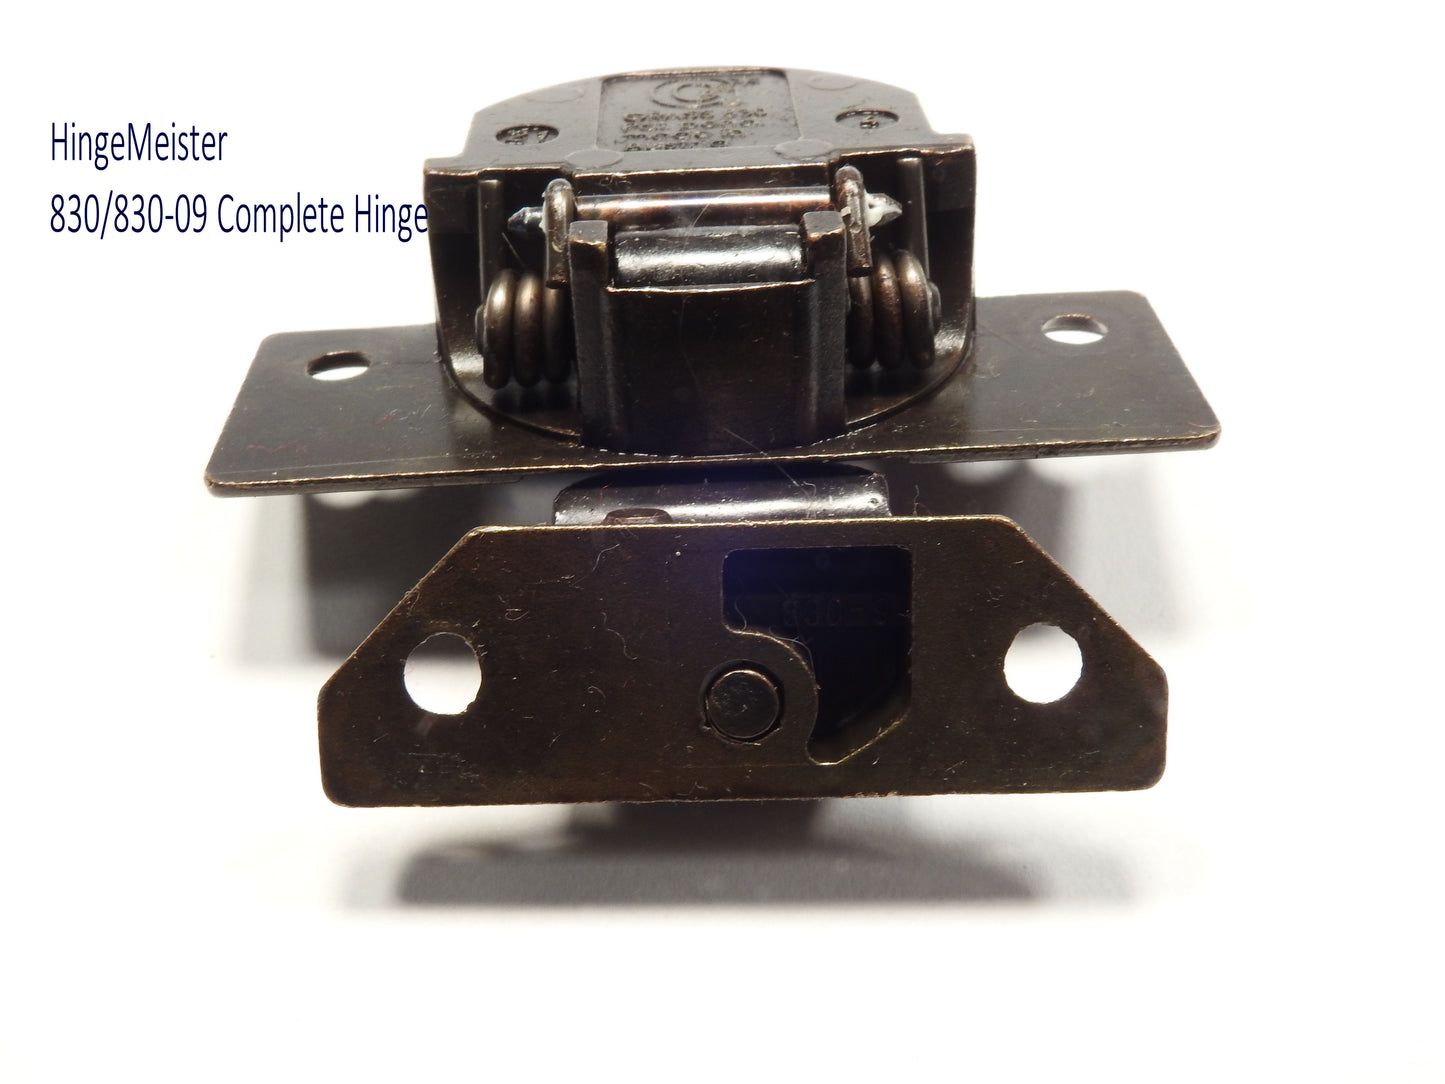 Grass 830-09 Bronze Hinge and mounting plate - Complete Hinge - Refurbished